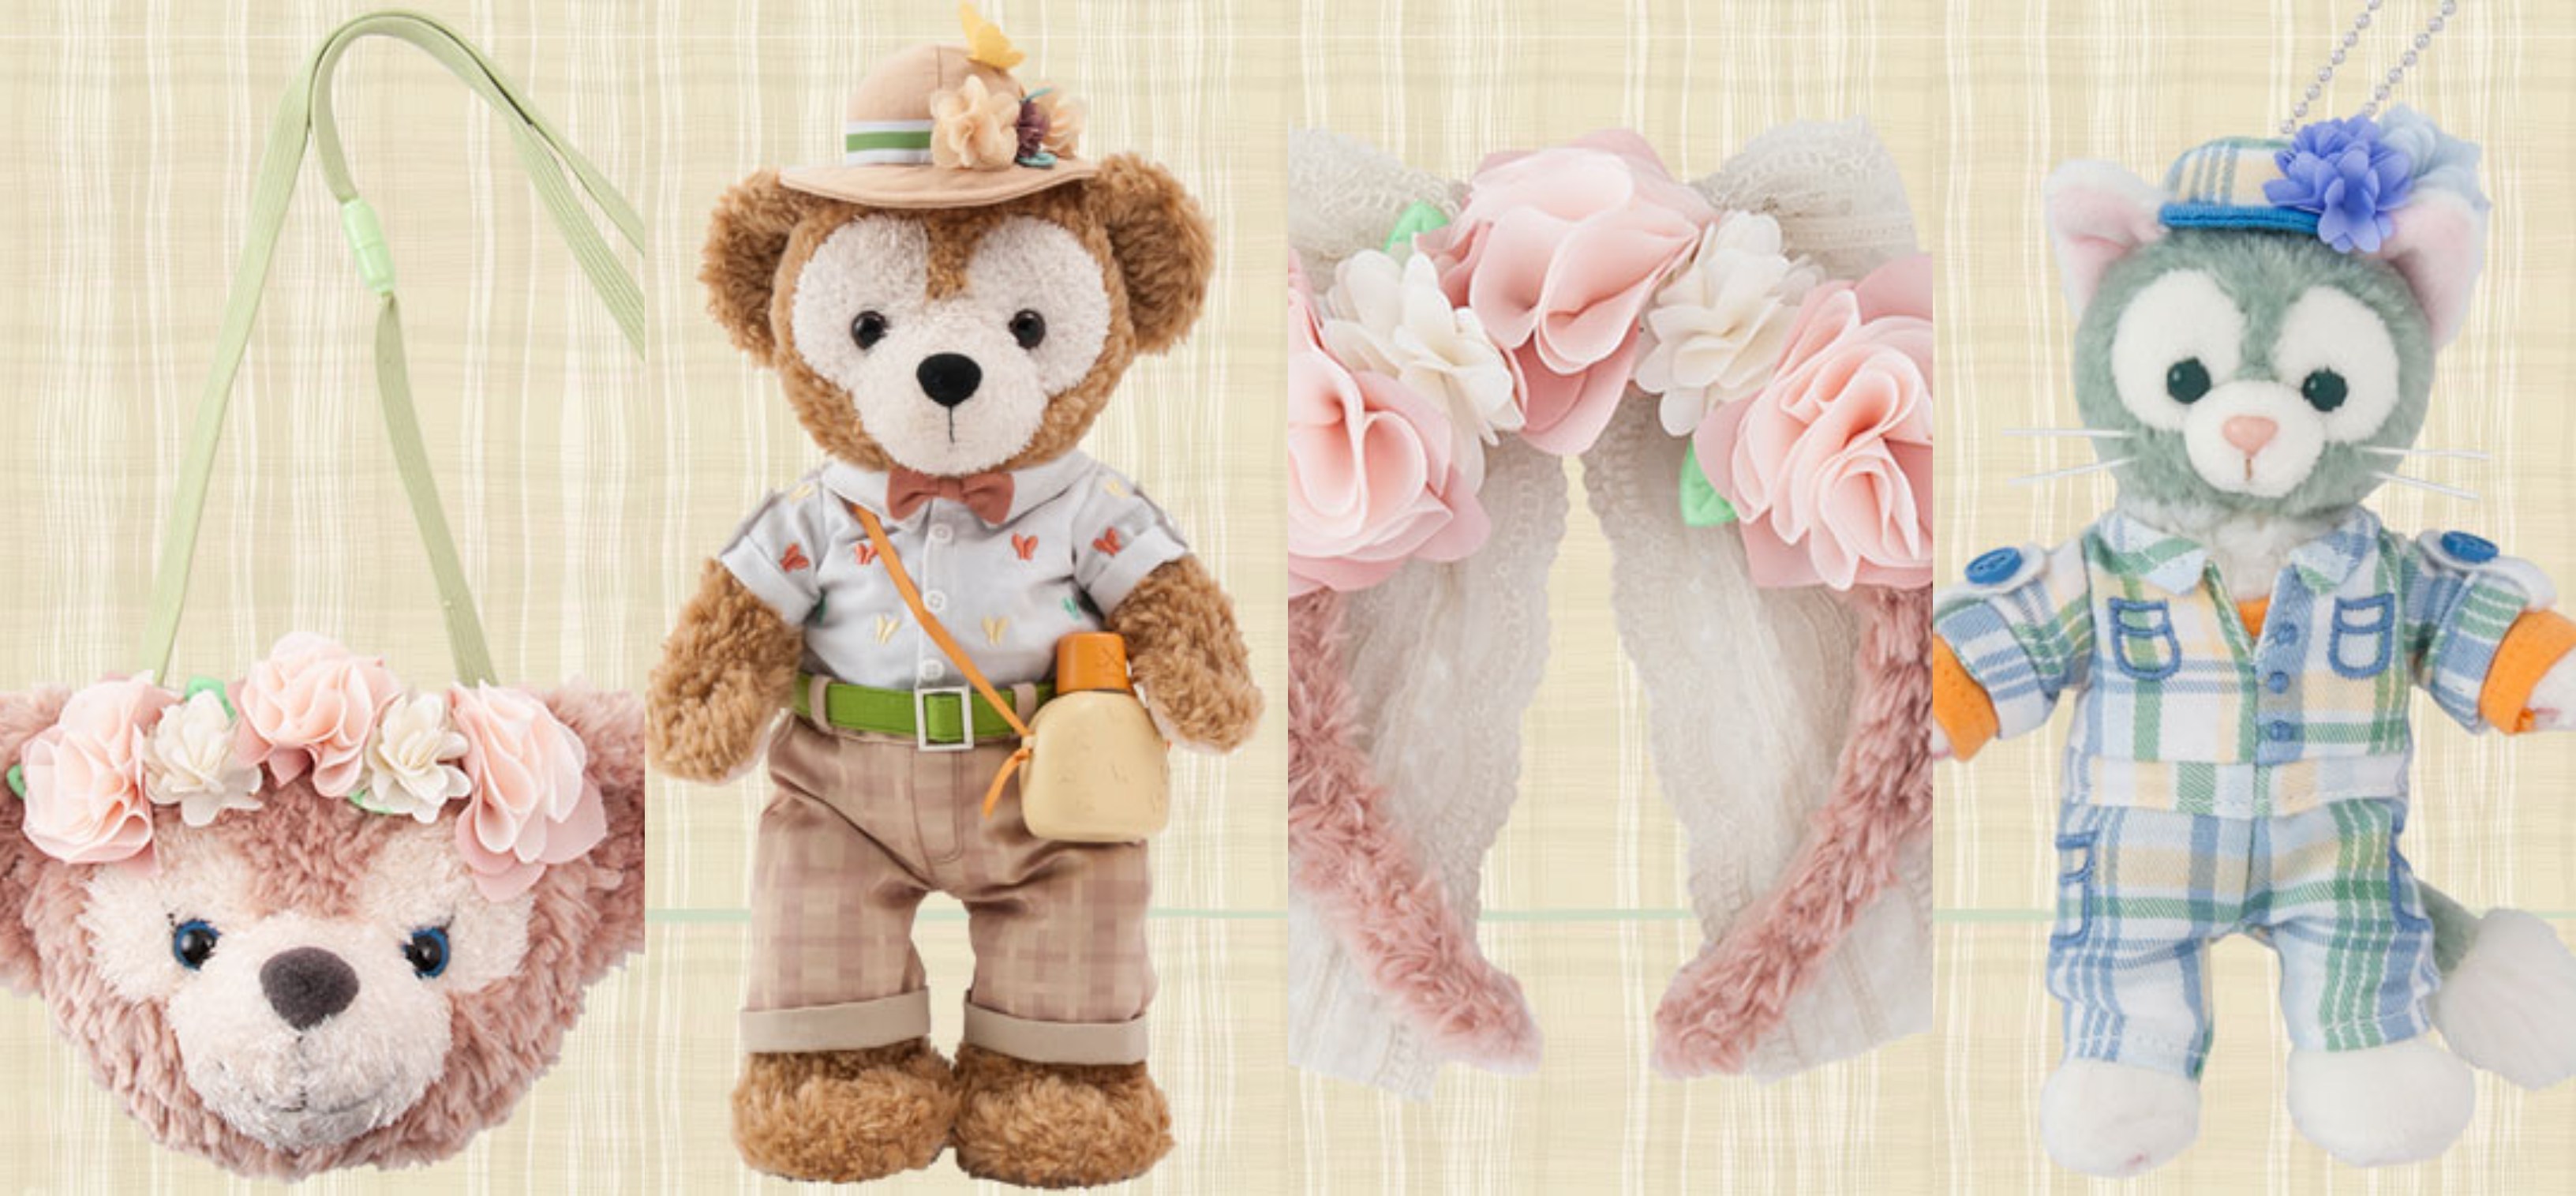 PHOTOS New Duffy & Friends "Spring in Bloom" Merchandise Coming March